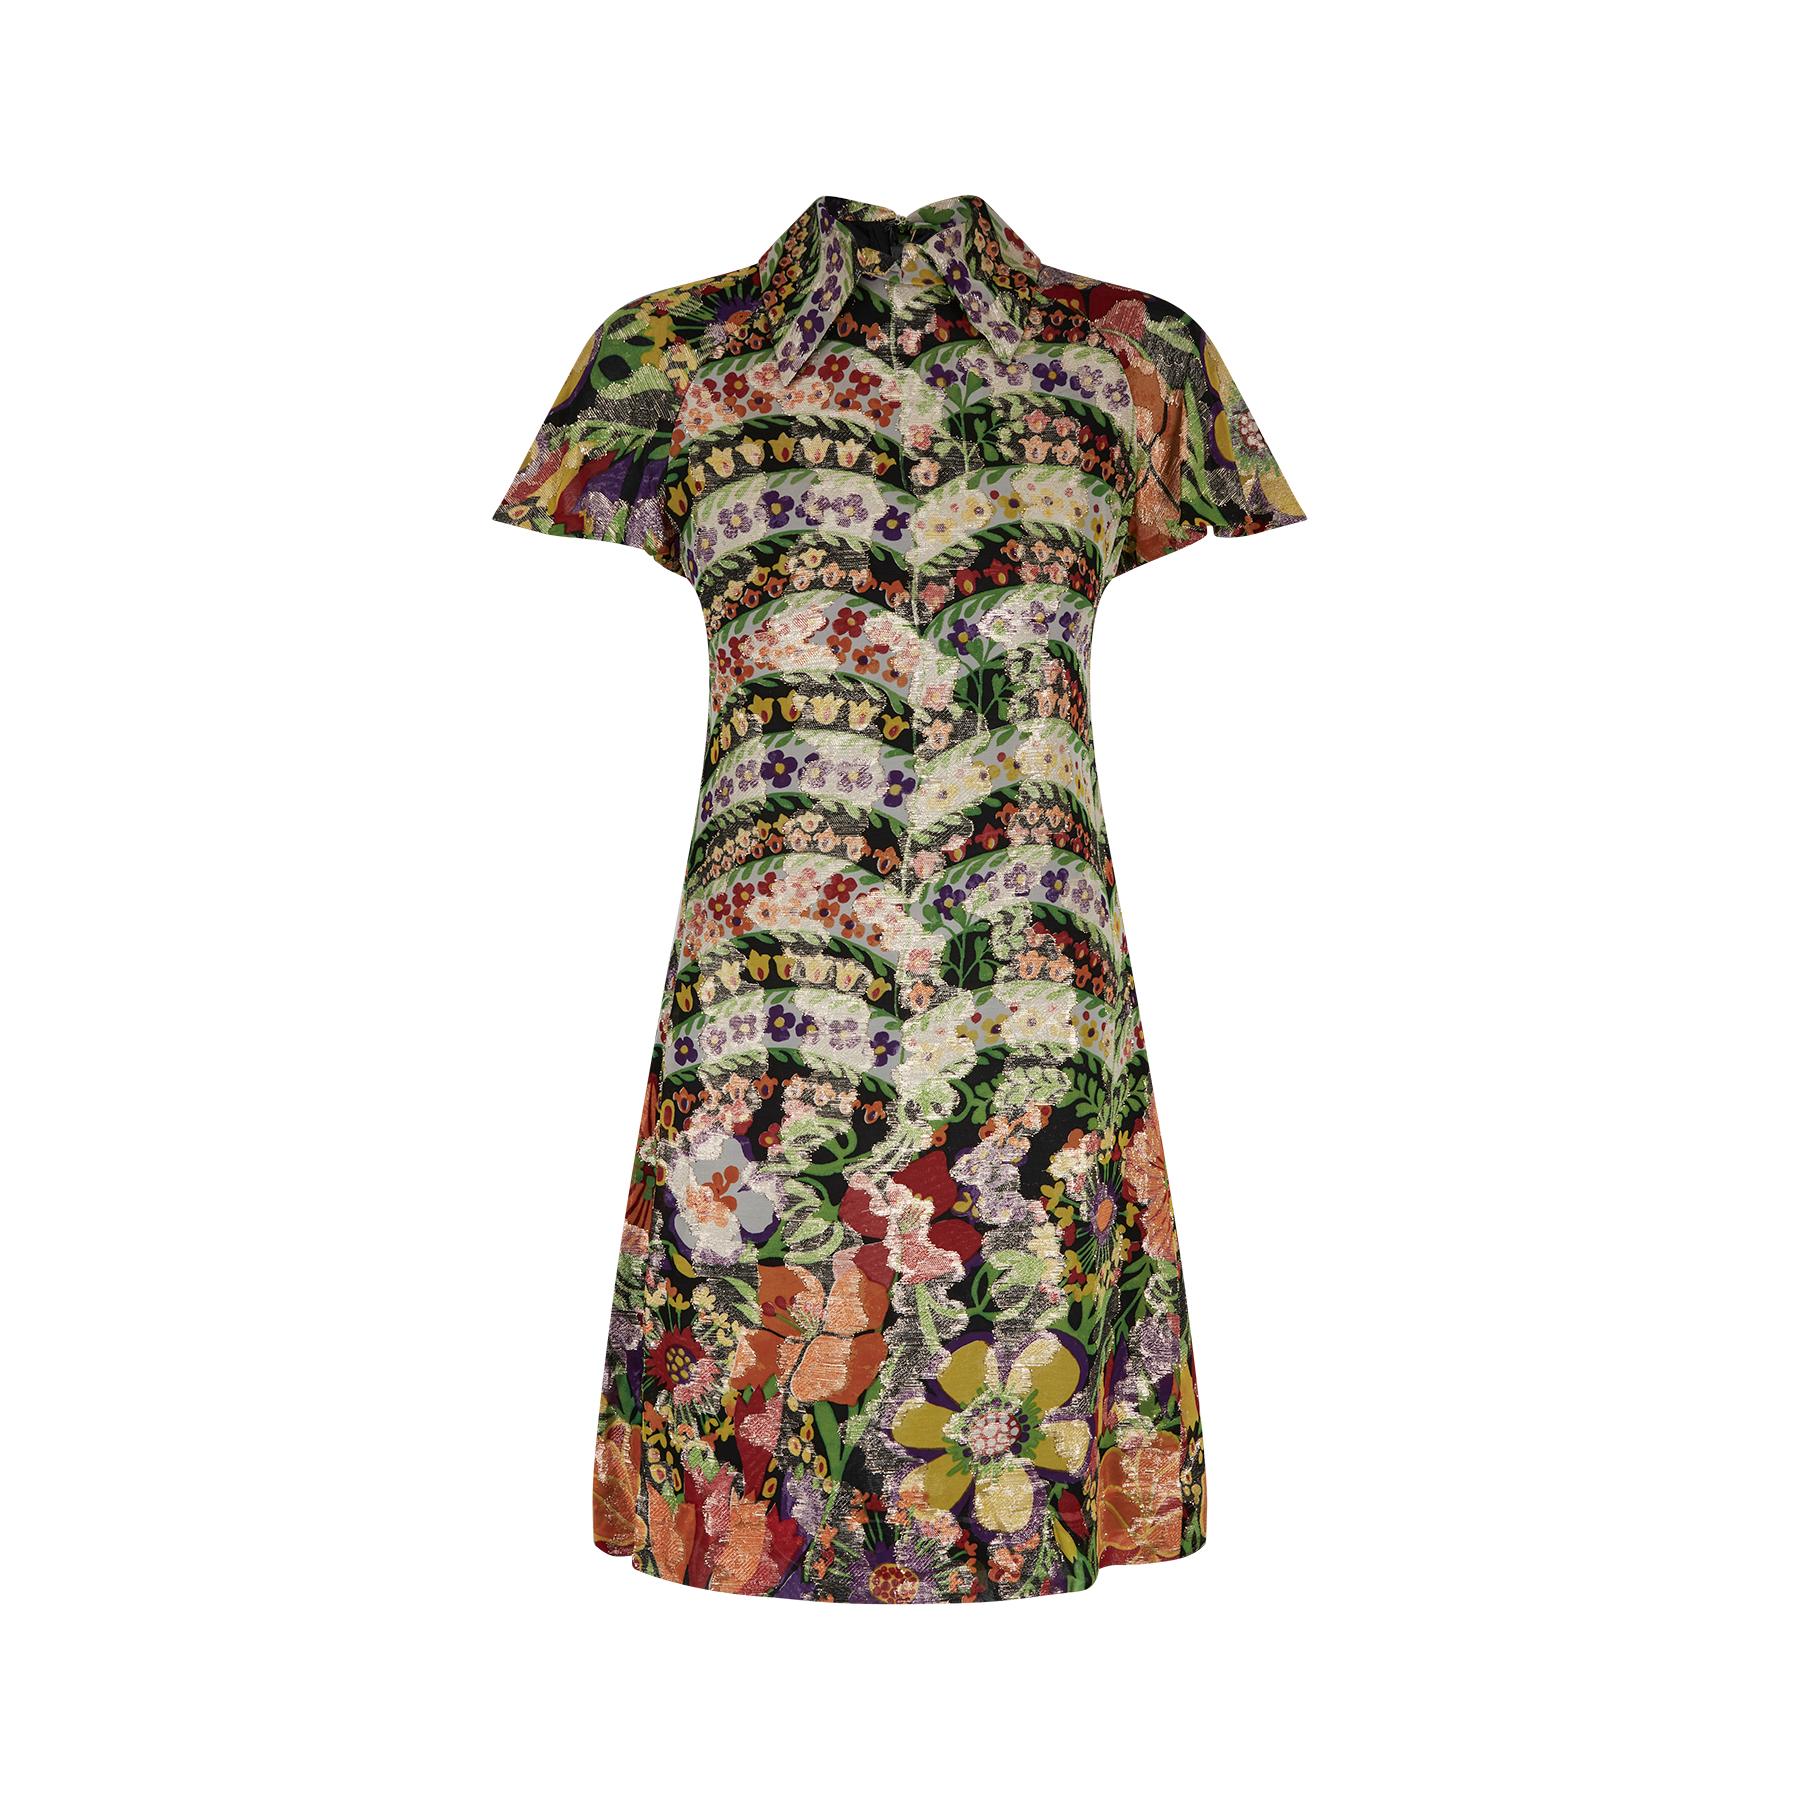 Late 1960s or early 1970s couture made floral lame dress. The print is exceptional and by American designer Rodriguez - its very similar to the work Oscar de la Renta was doing around this time. His clothing line was sold in high end department